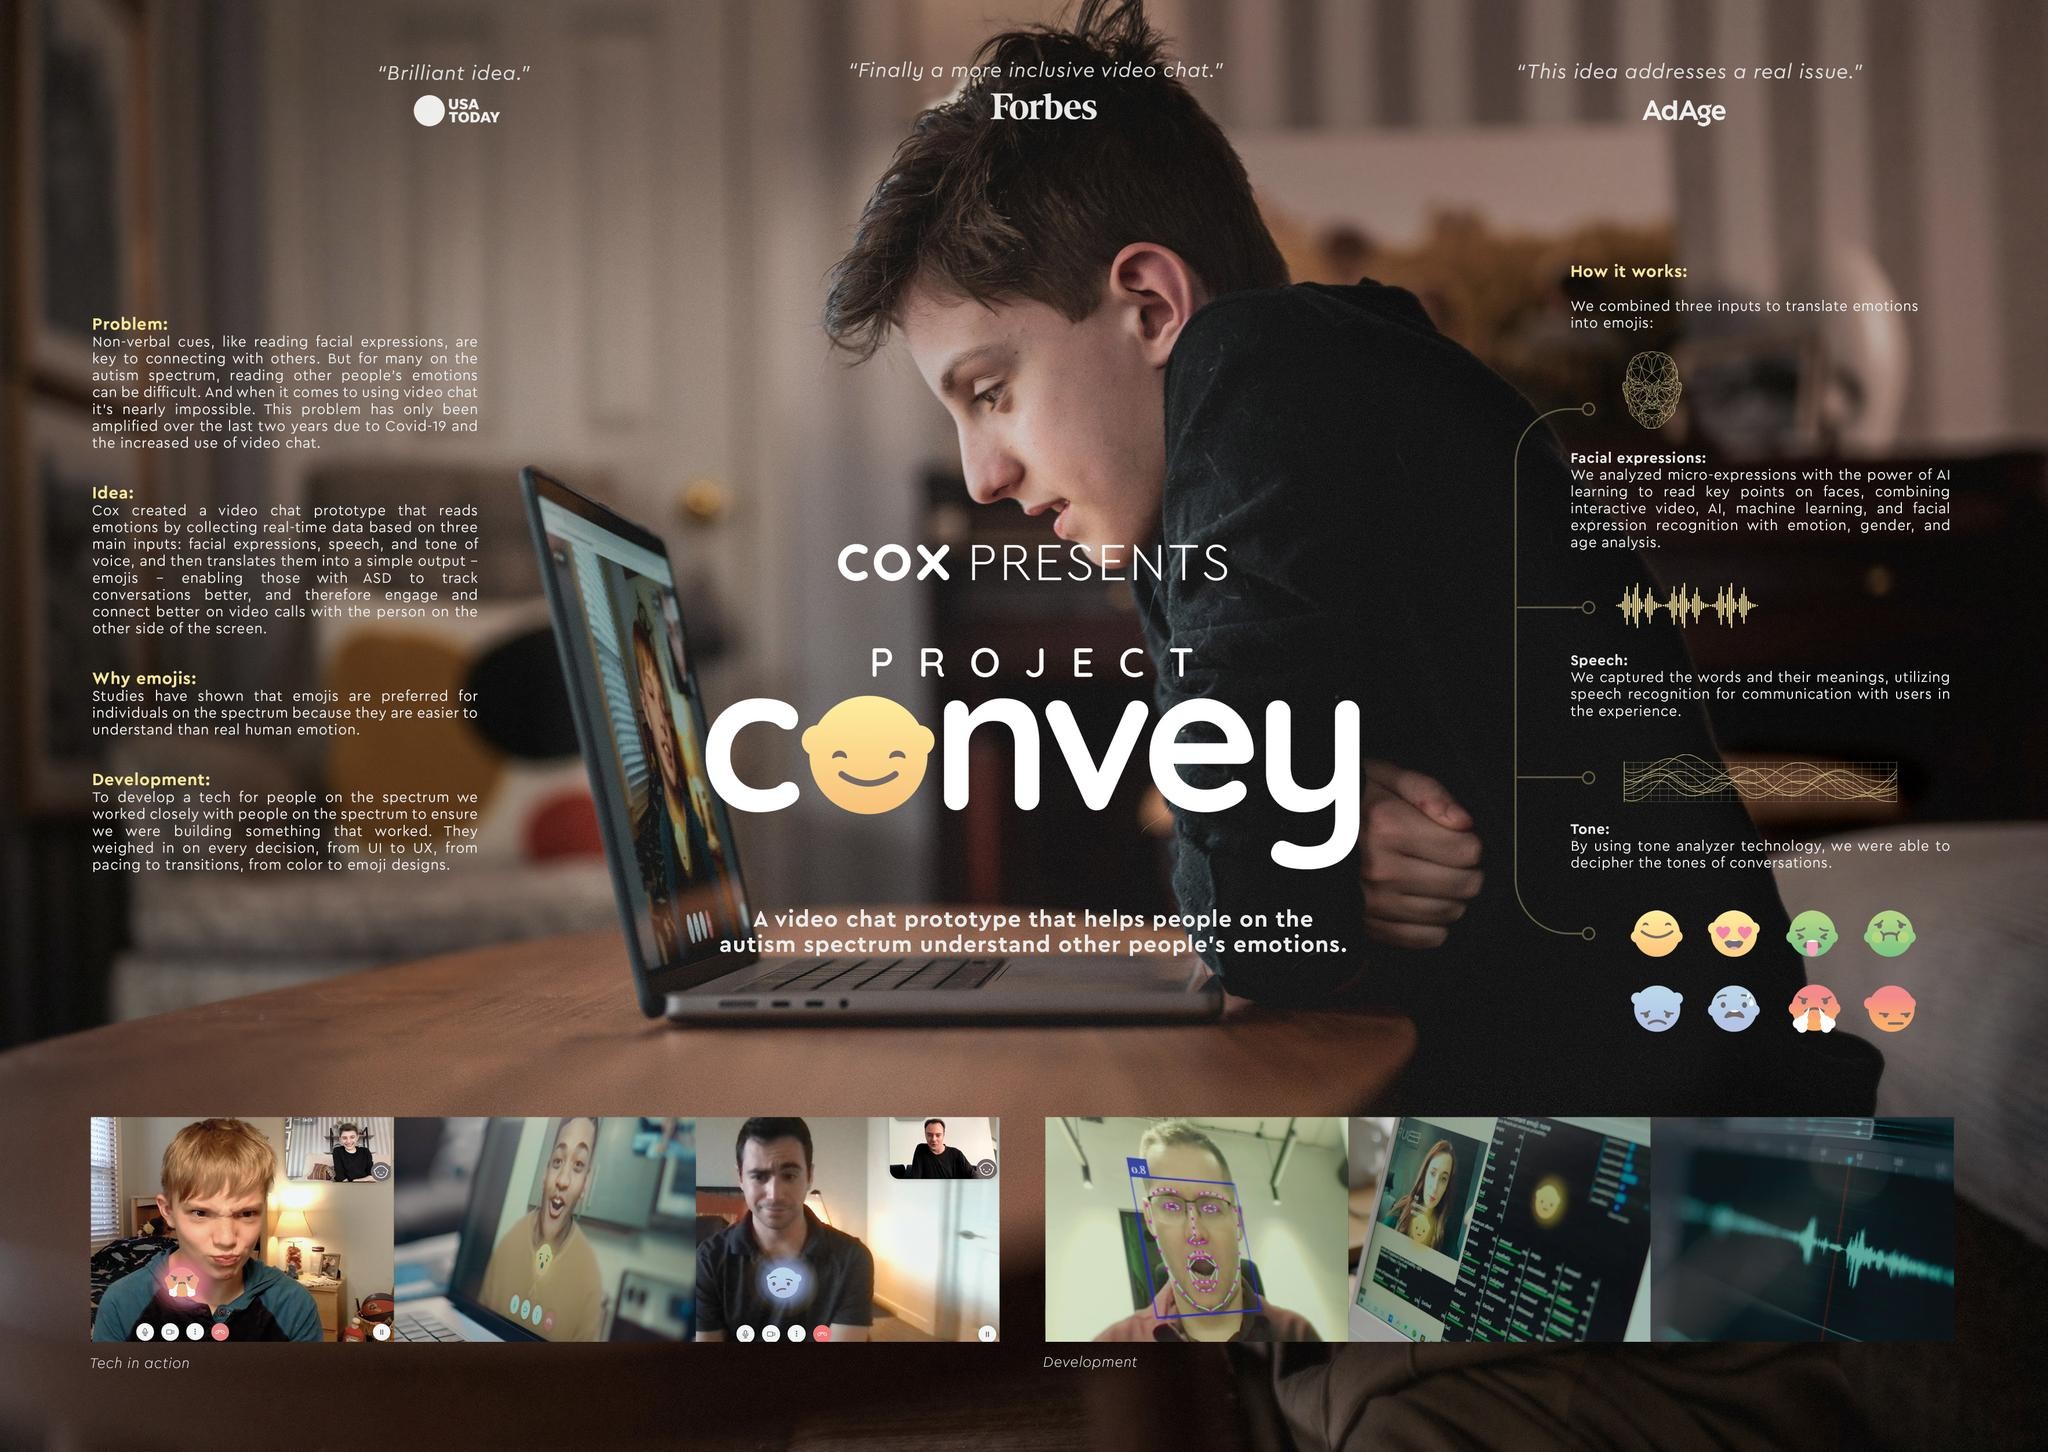 PROJECT CONVEY